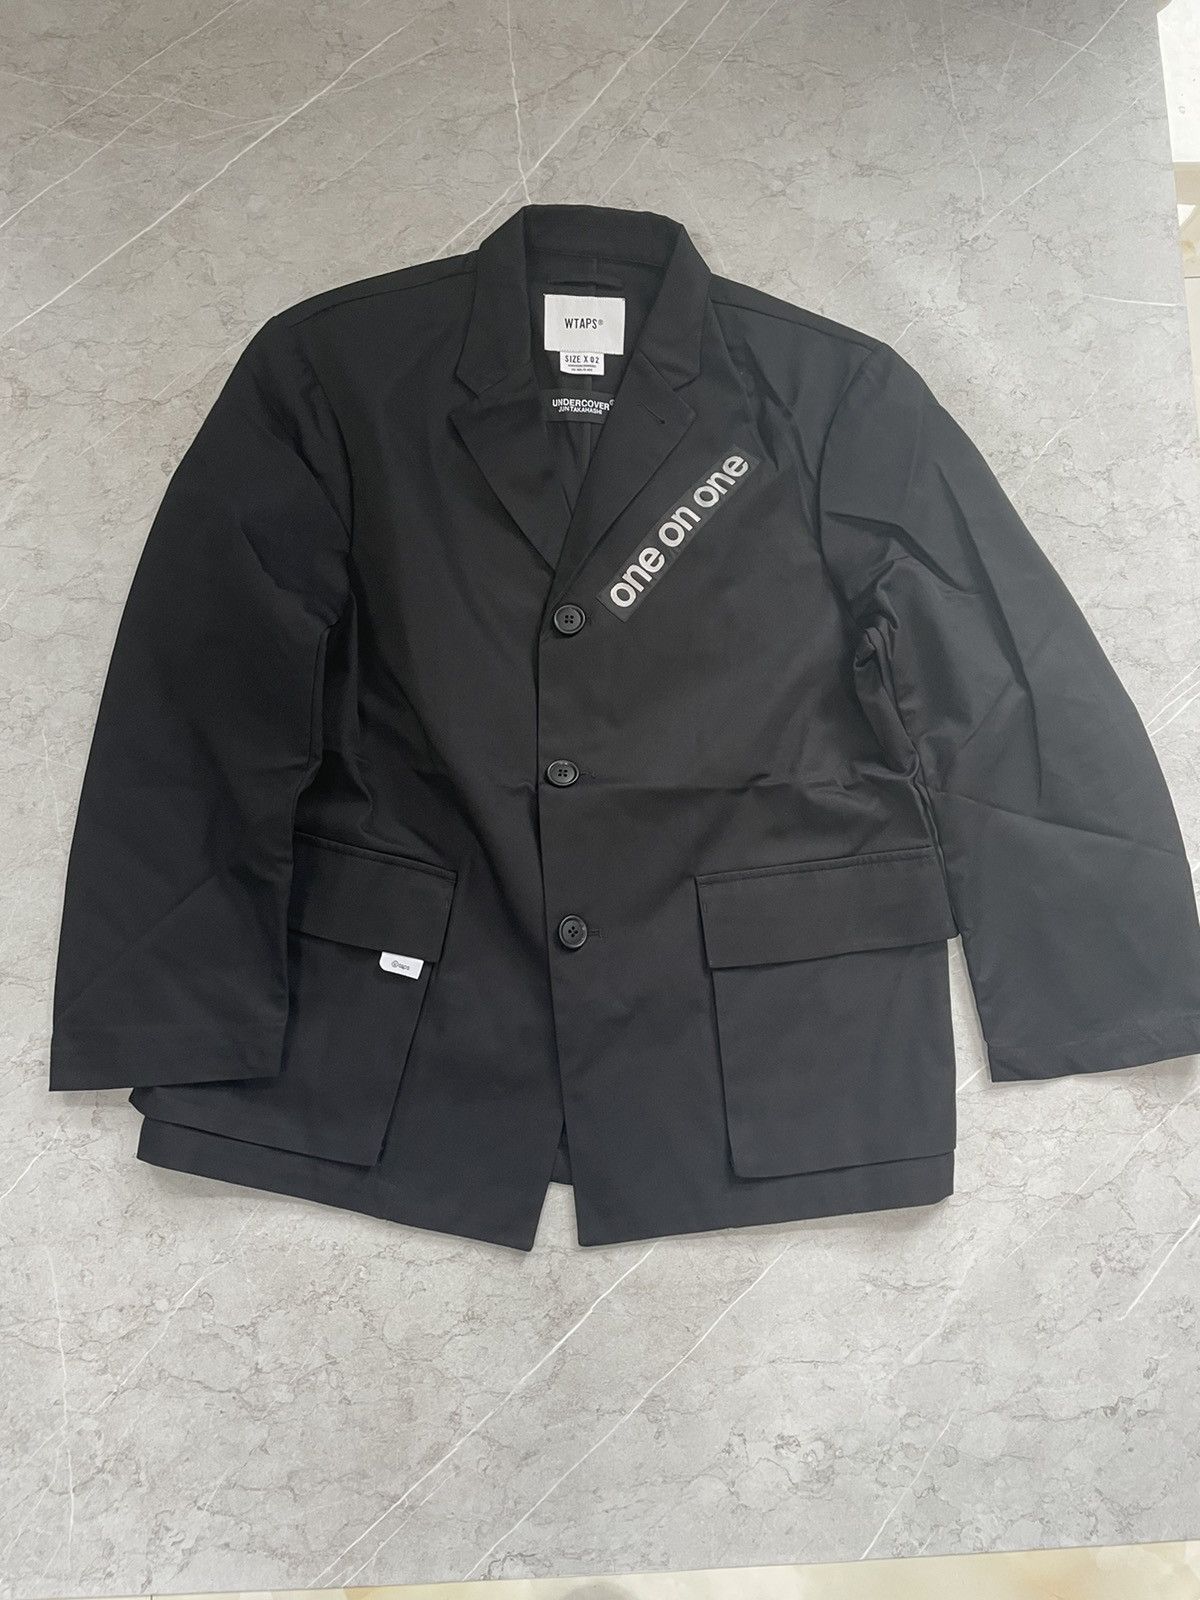 Undercover Undercover wtaps one one one jacket m | Grailed